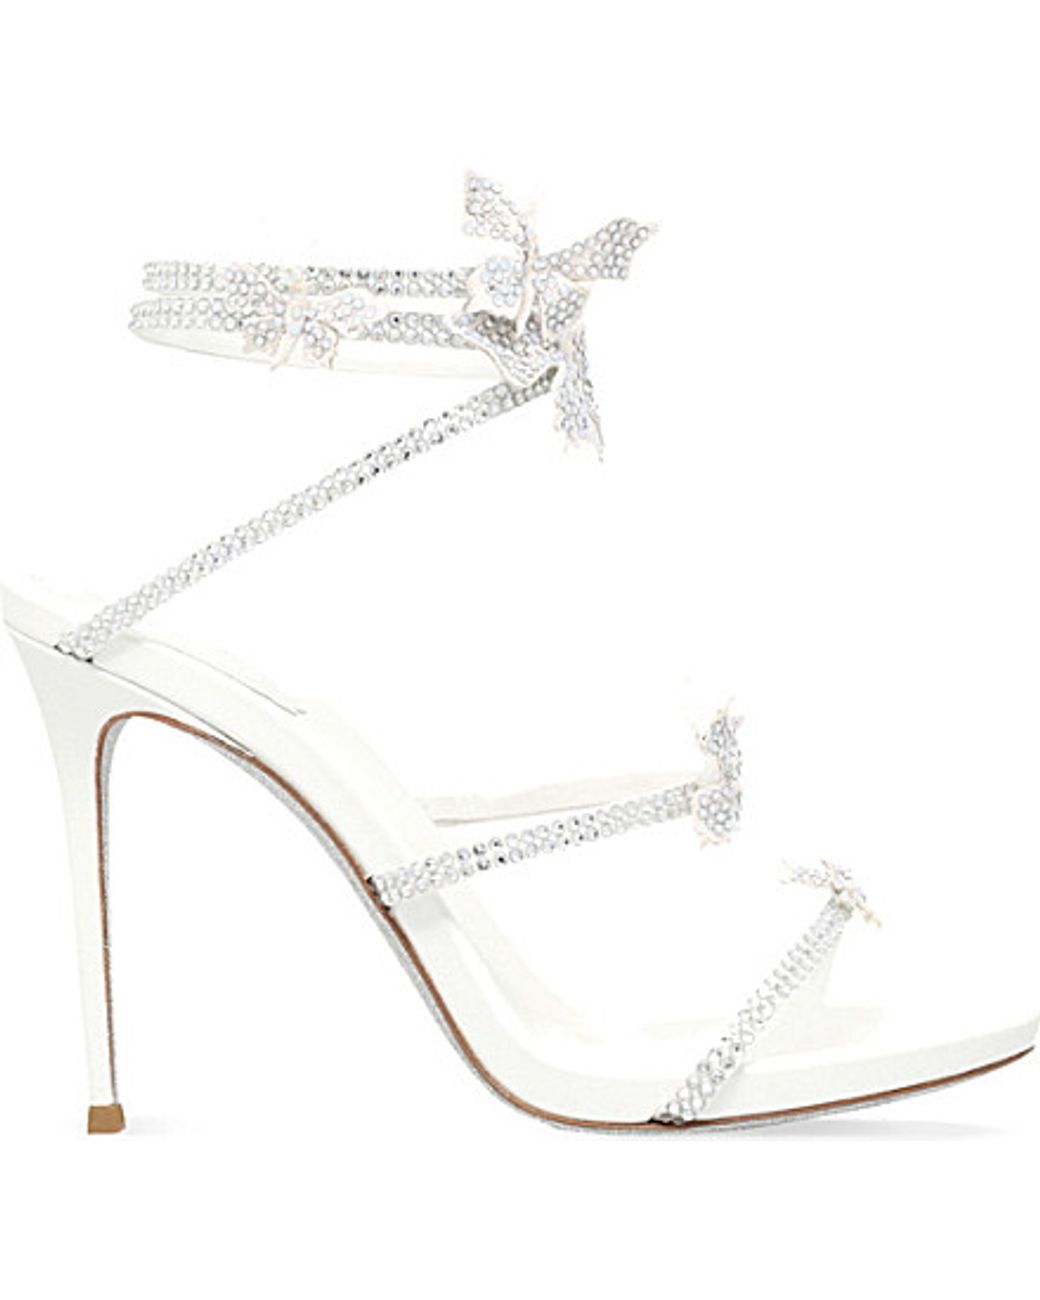 Rene Caovilla Butterfly Wrap 105 Leather Heeled Sandals in White | Lyst